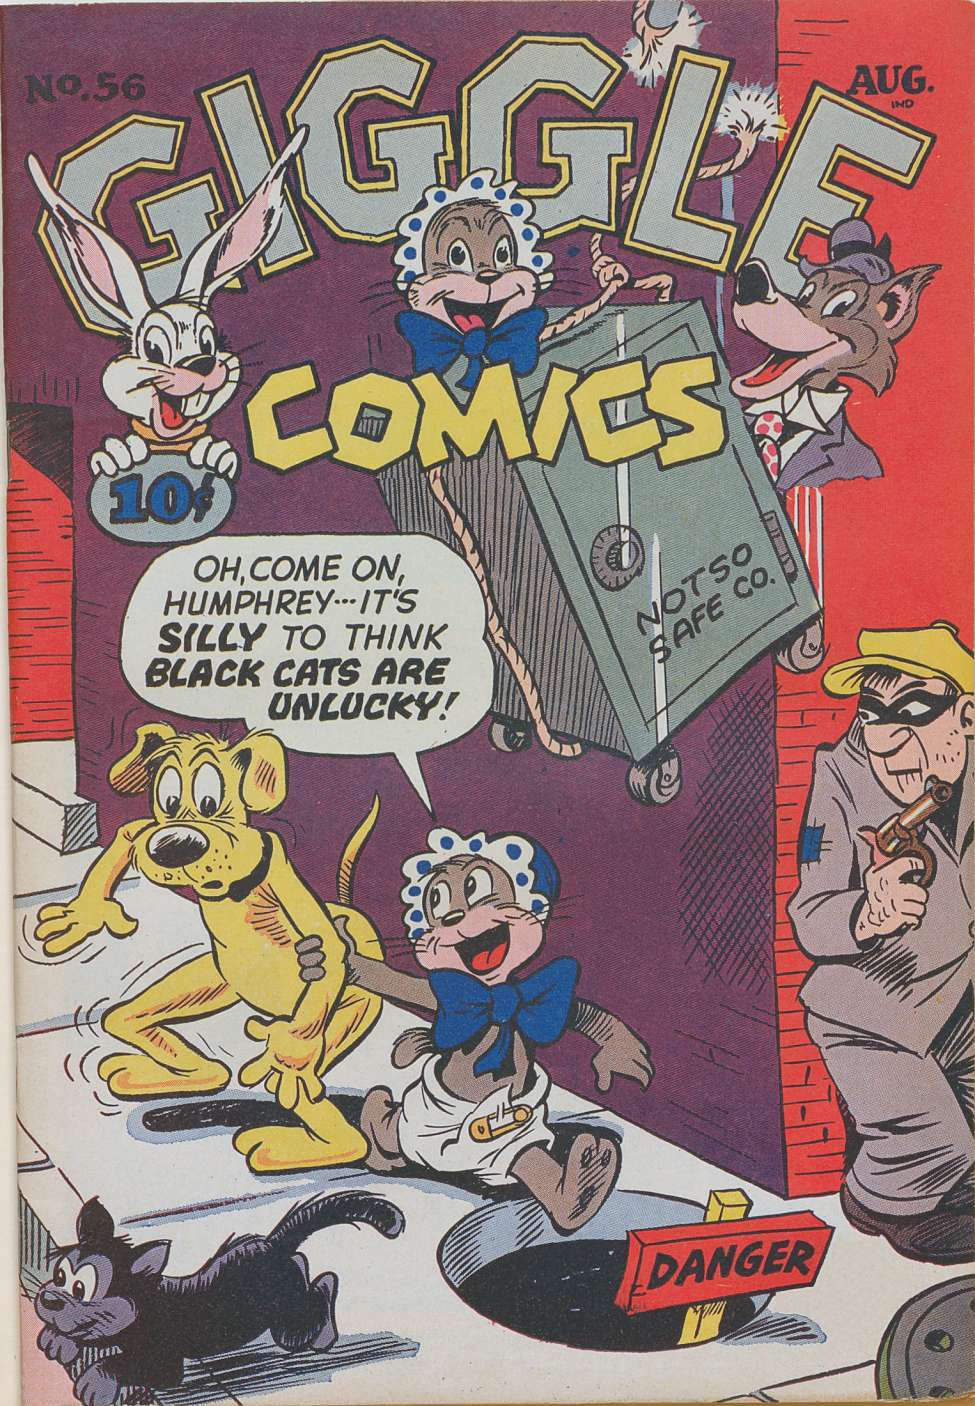 Comic Book Cover For Giggle Comics 56